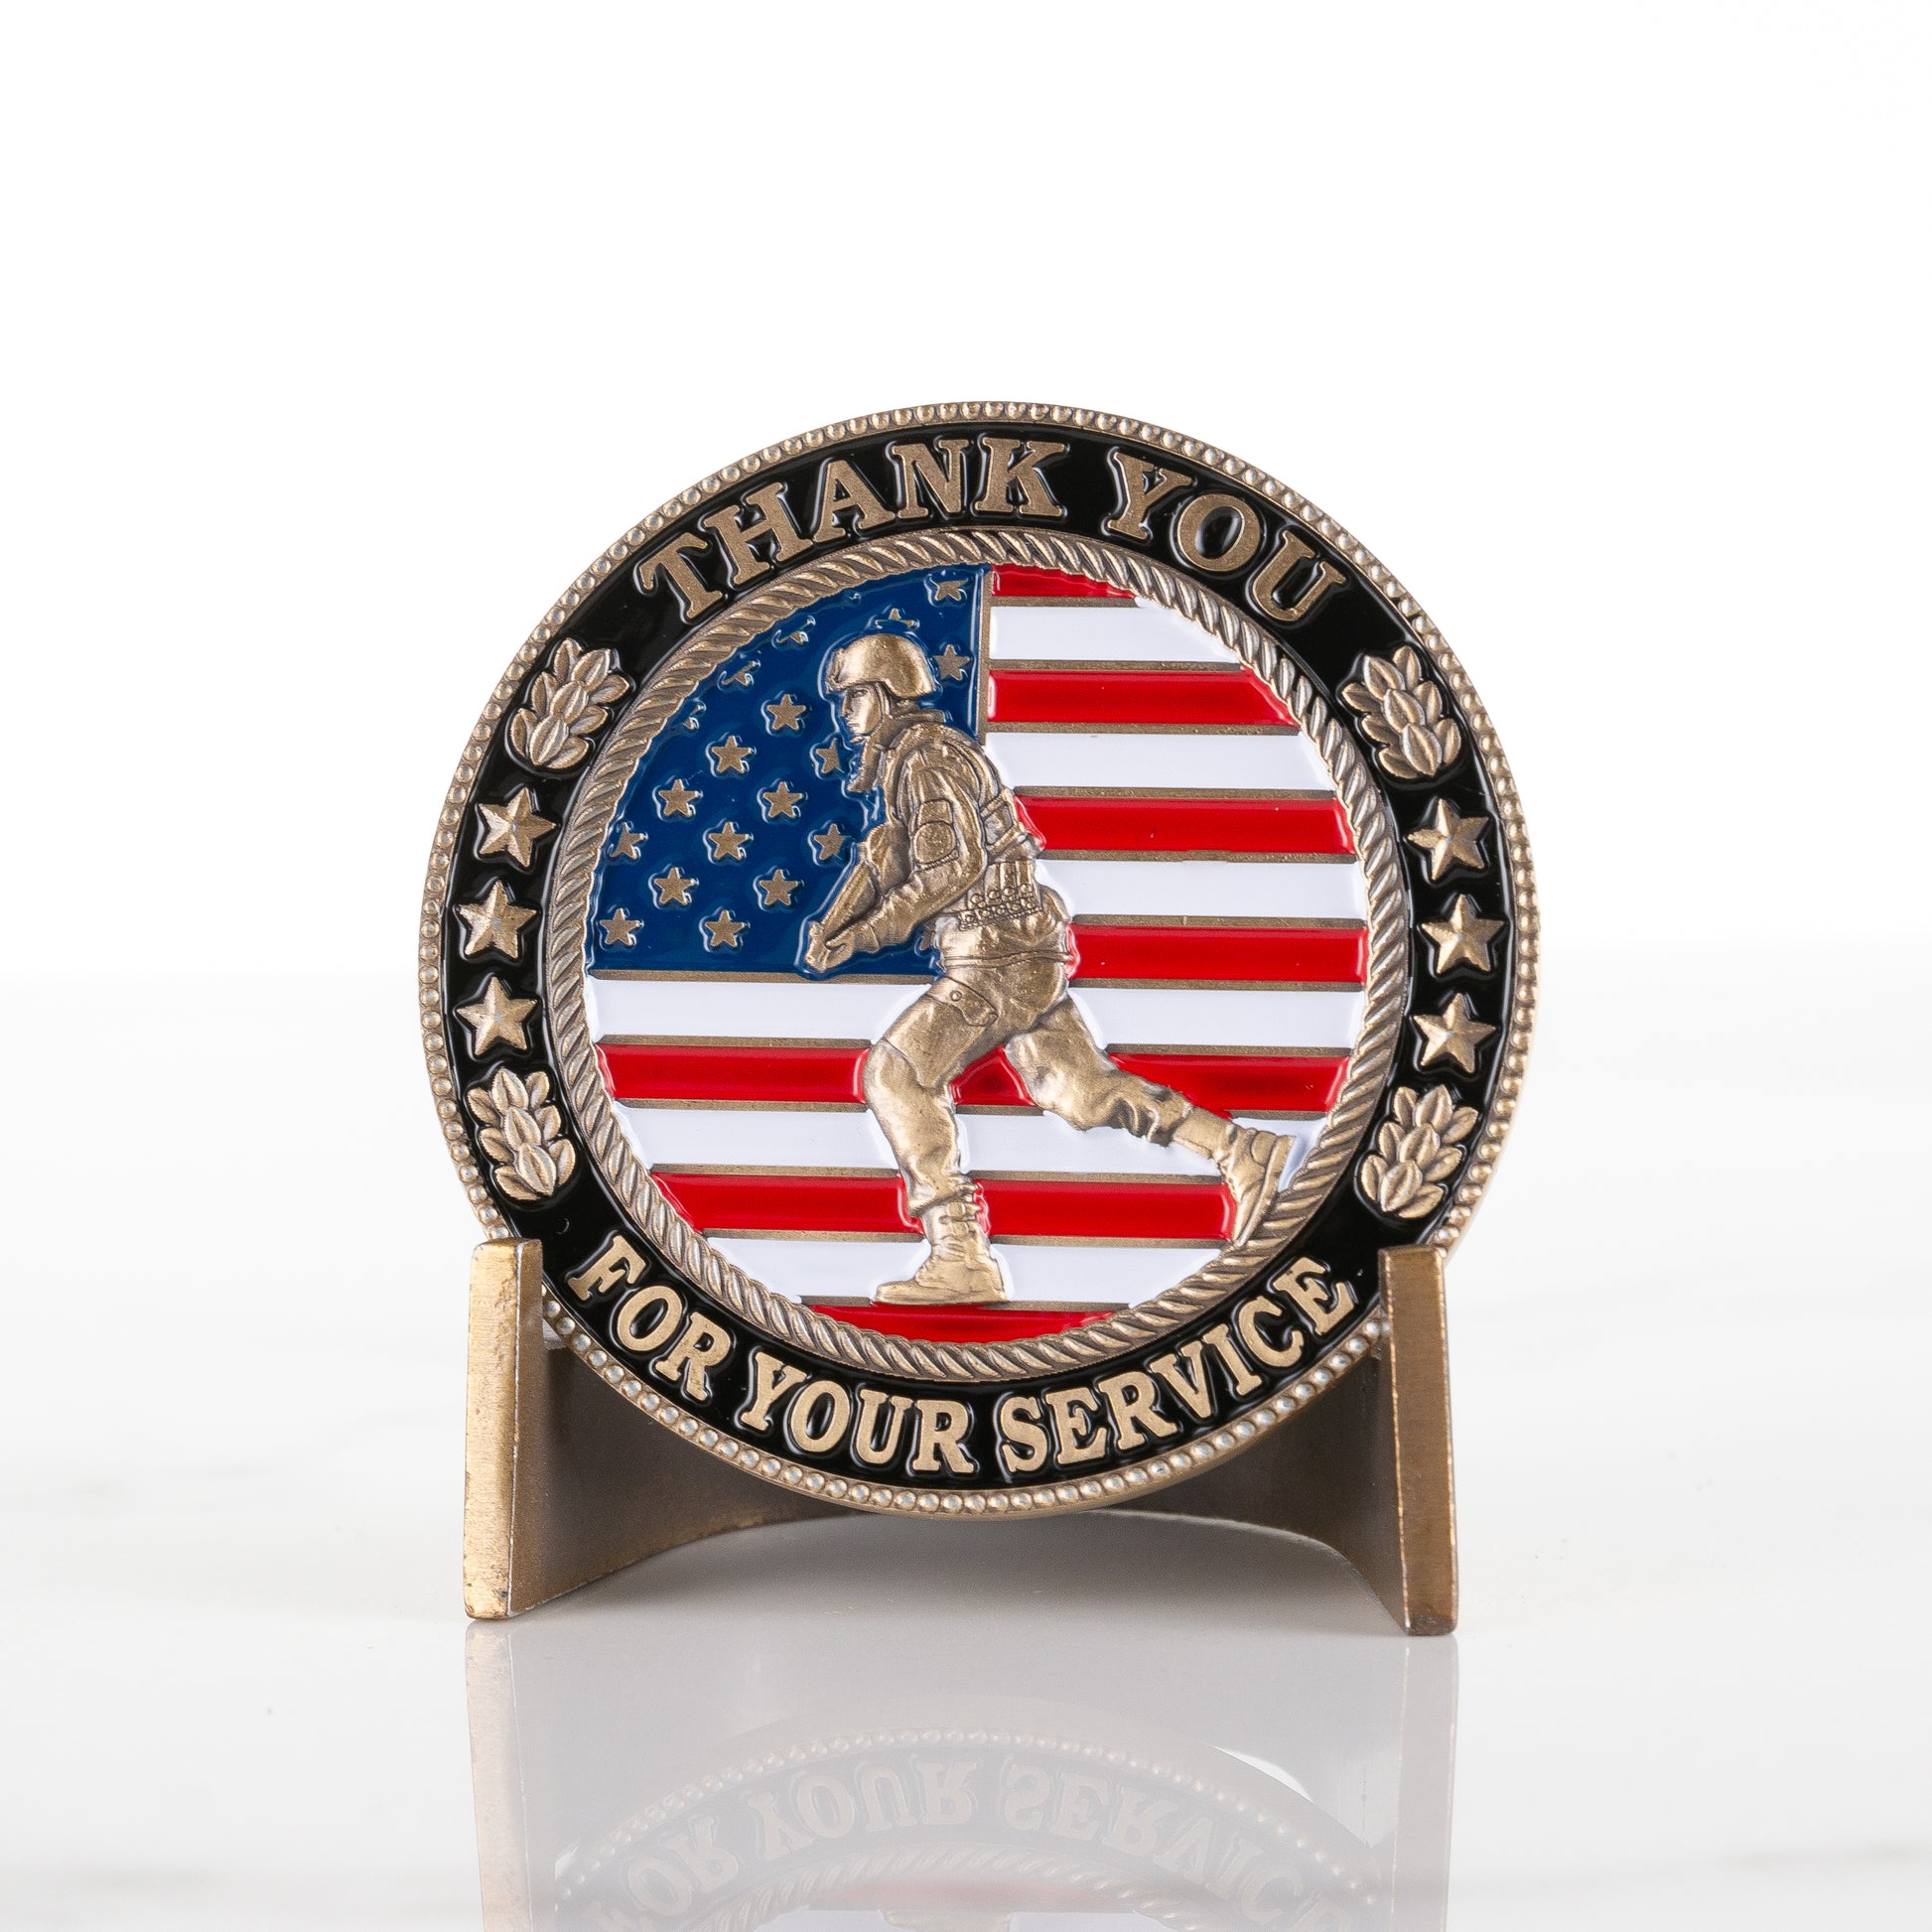 thank you coin for veterans